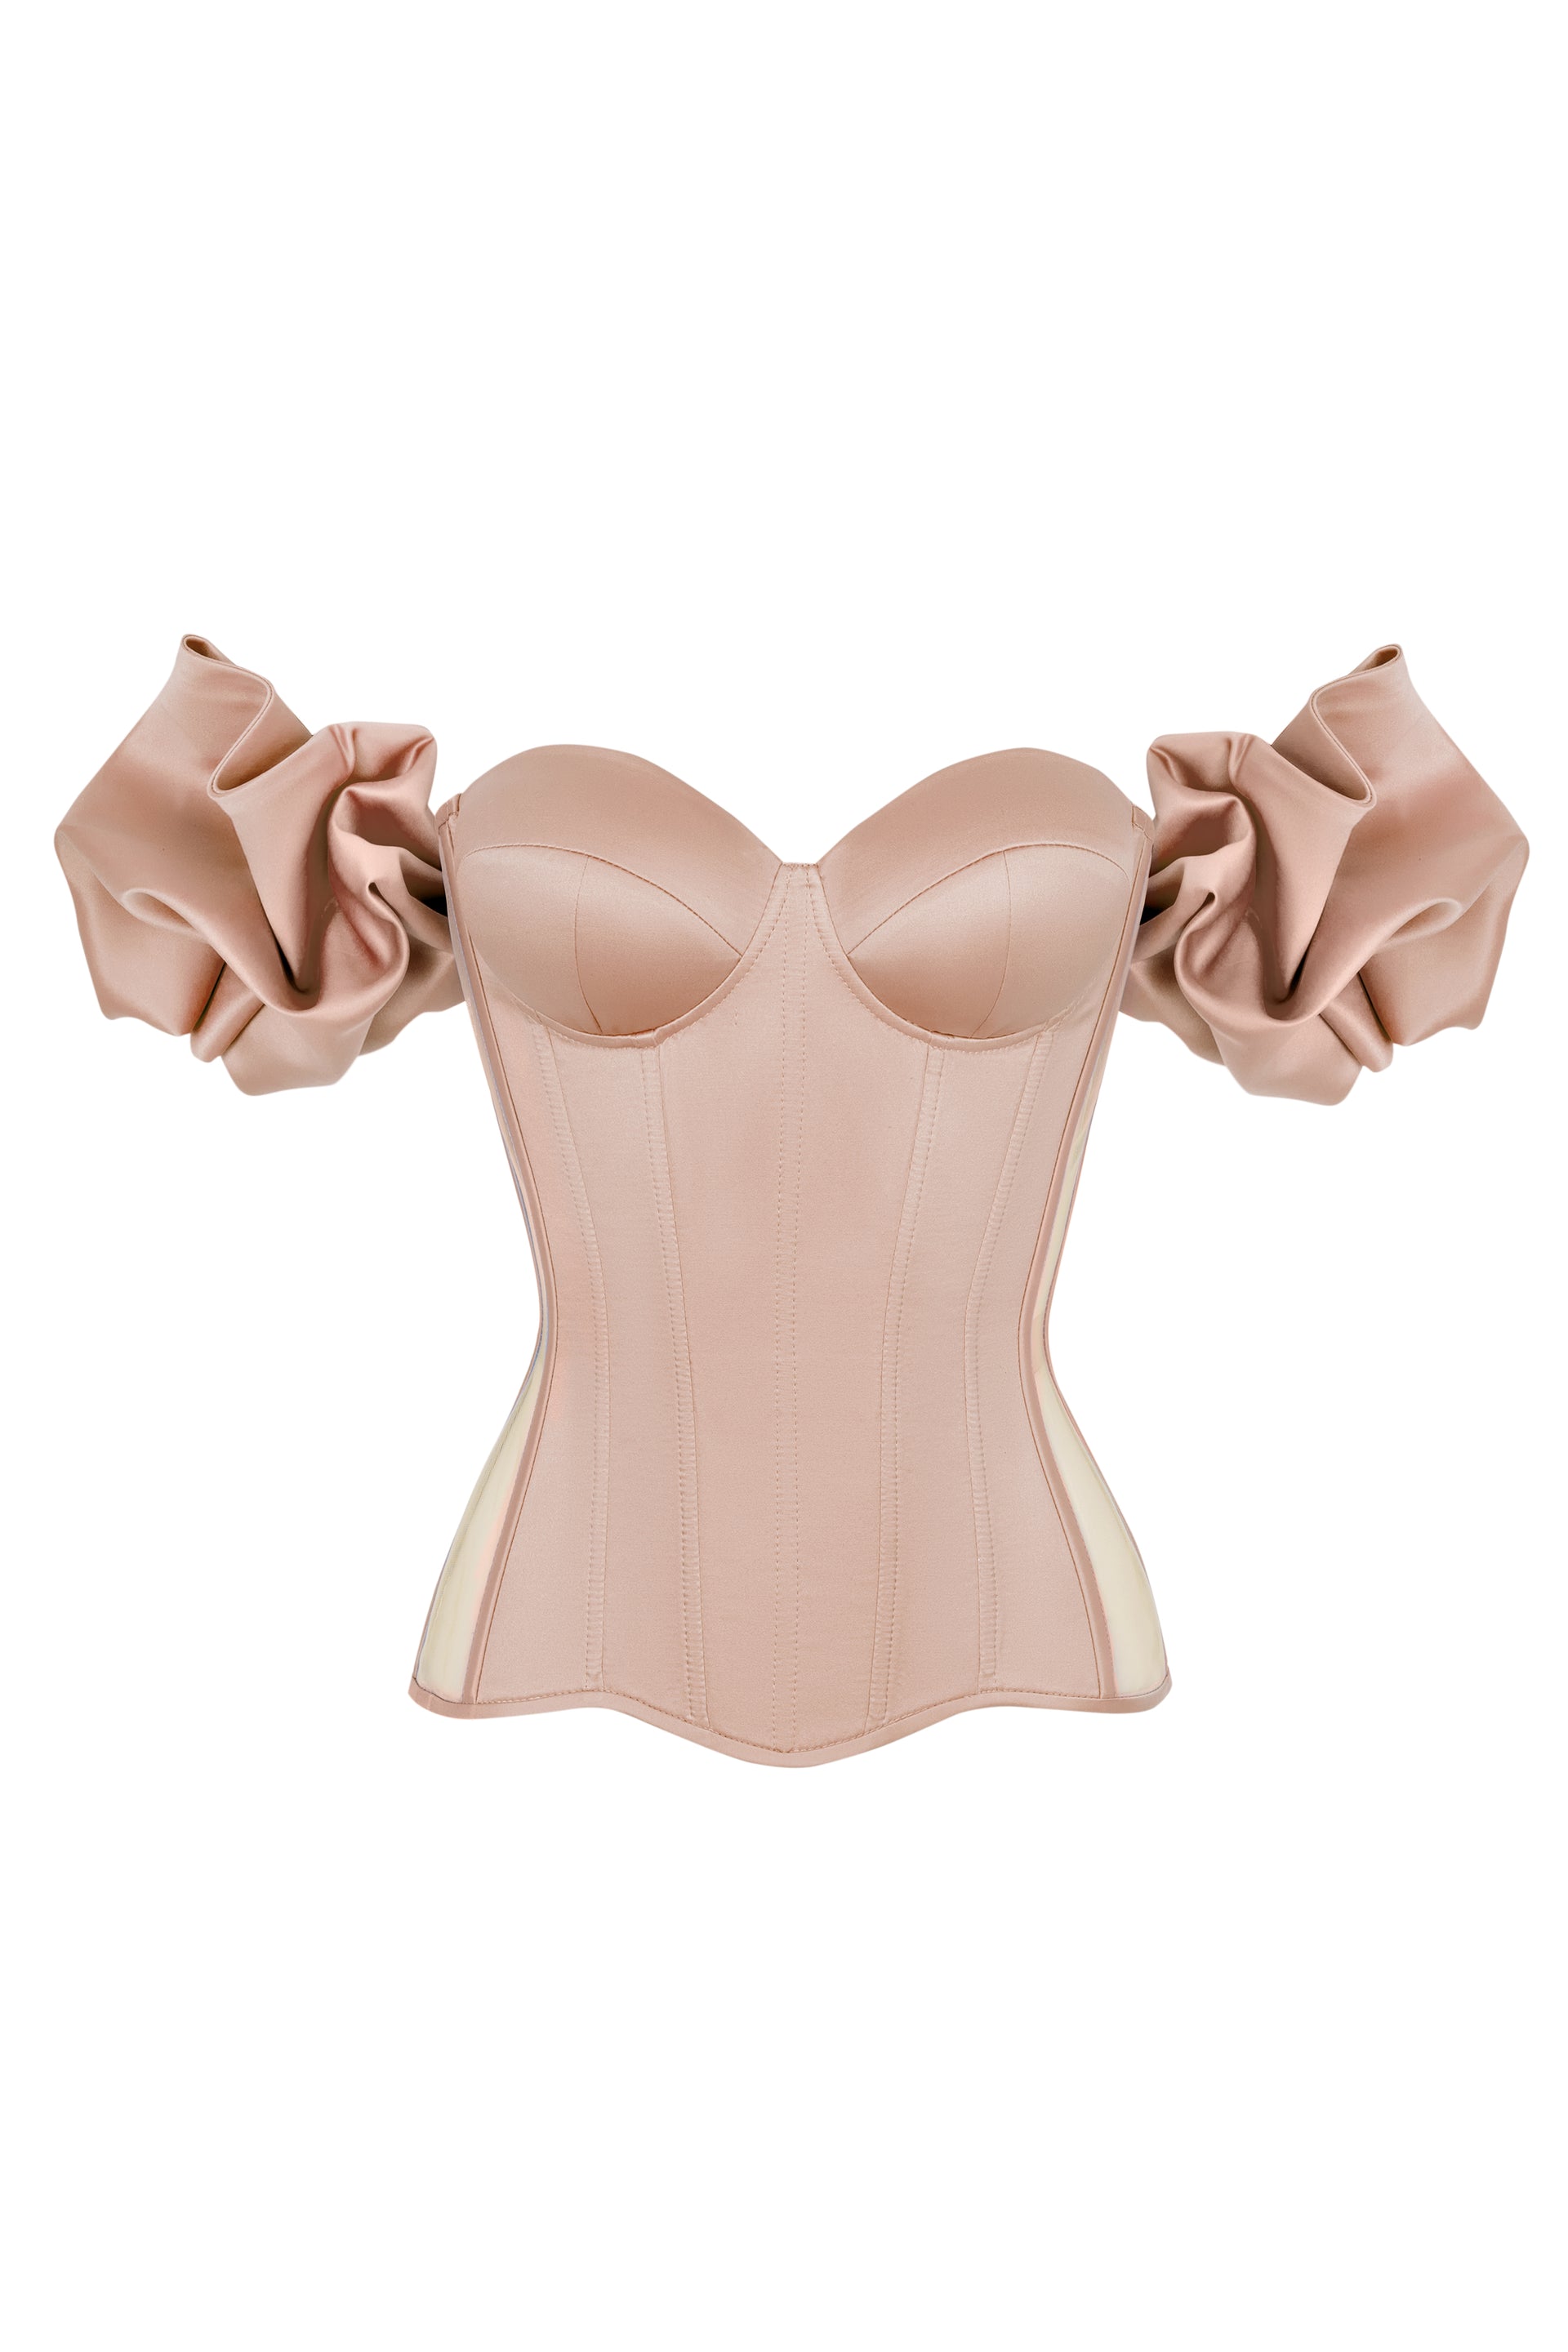 Brown satin corset with transparent back and detachable sleeves